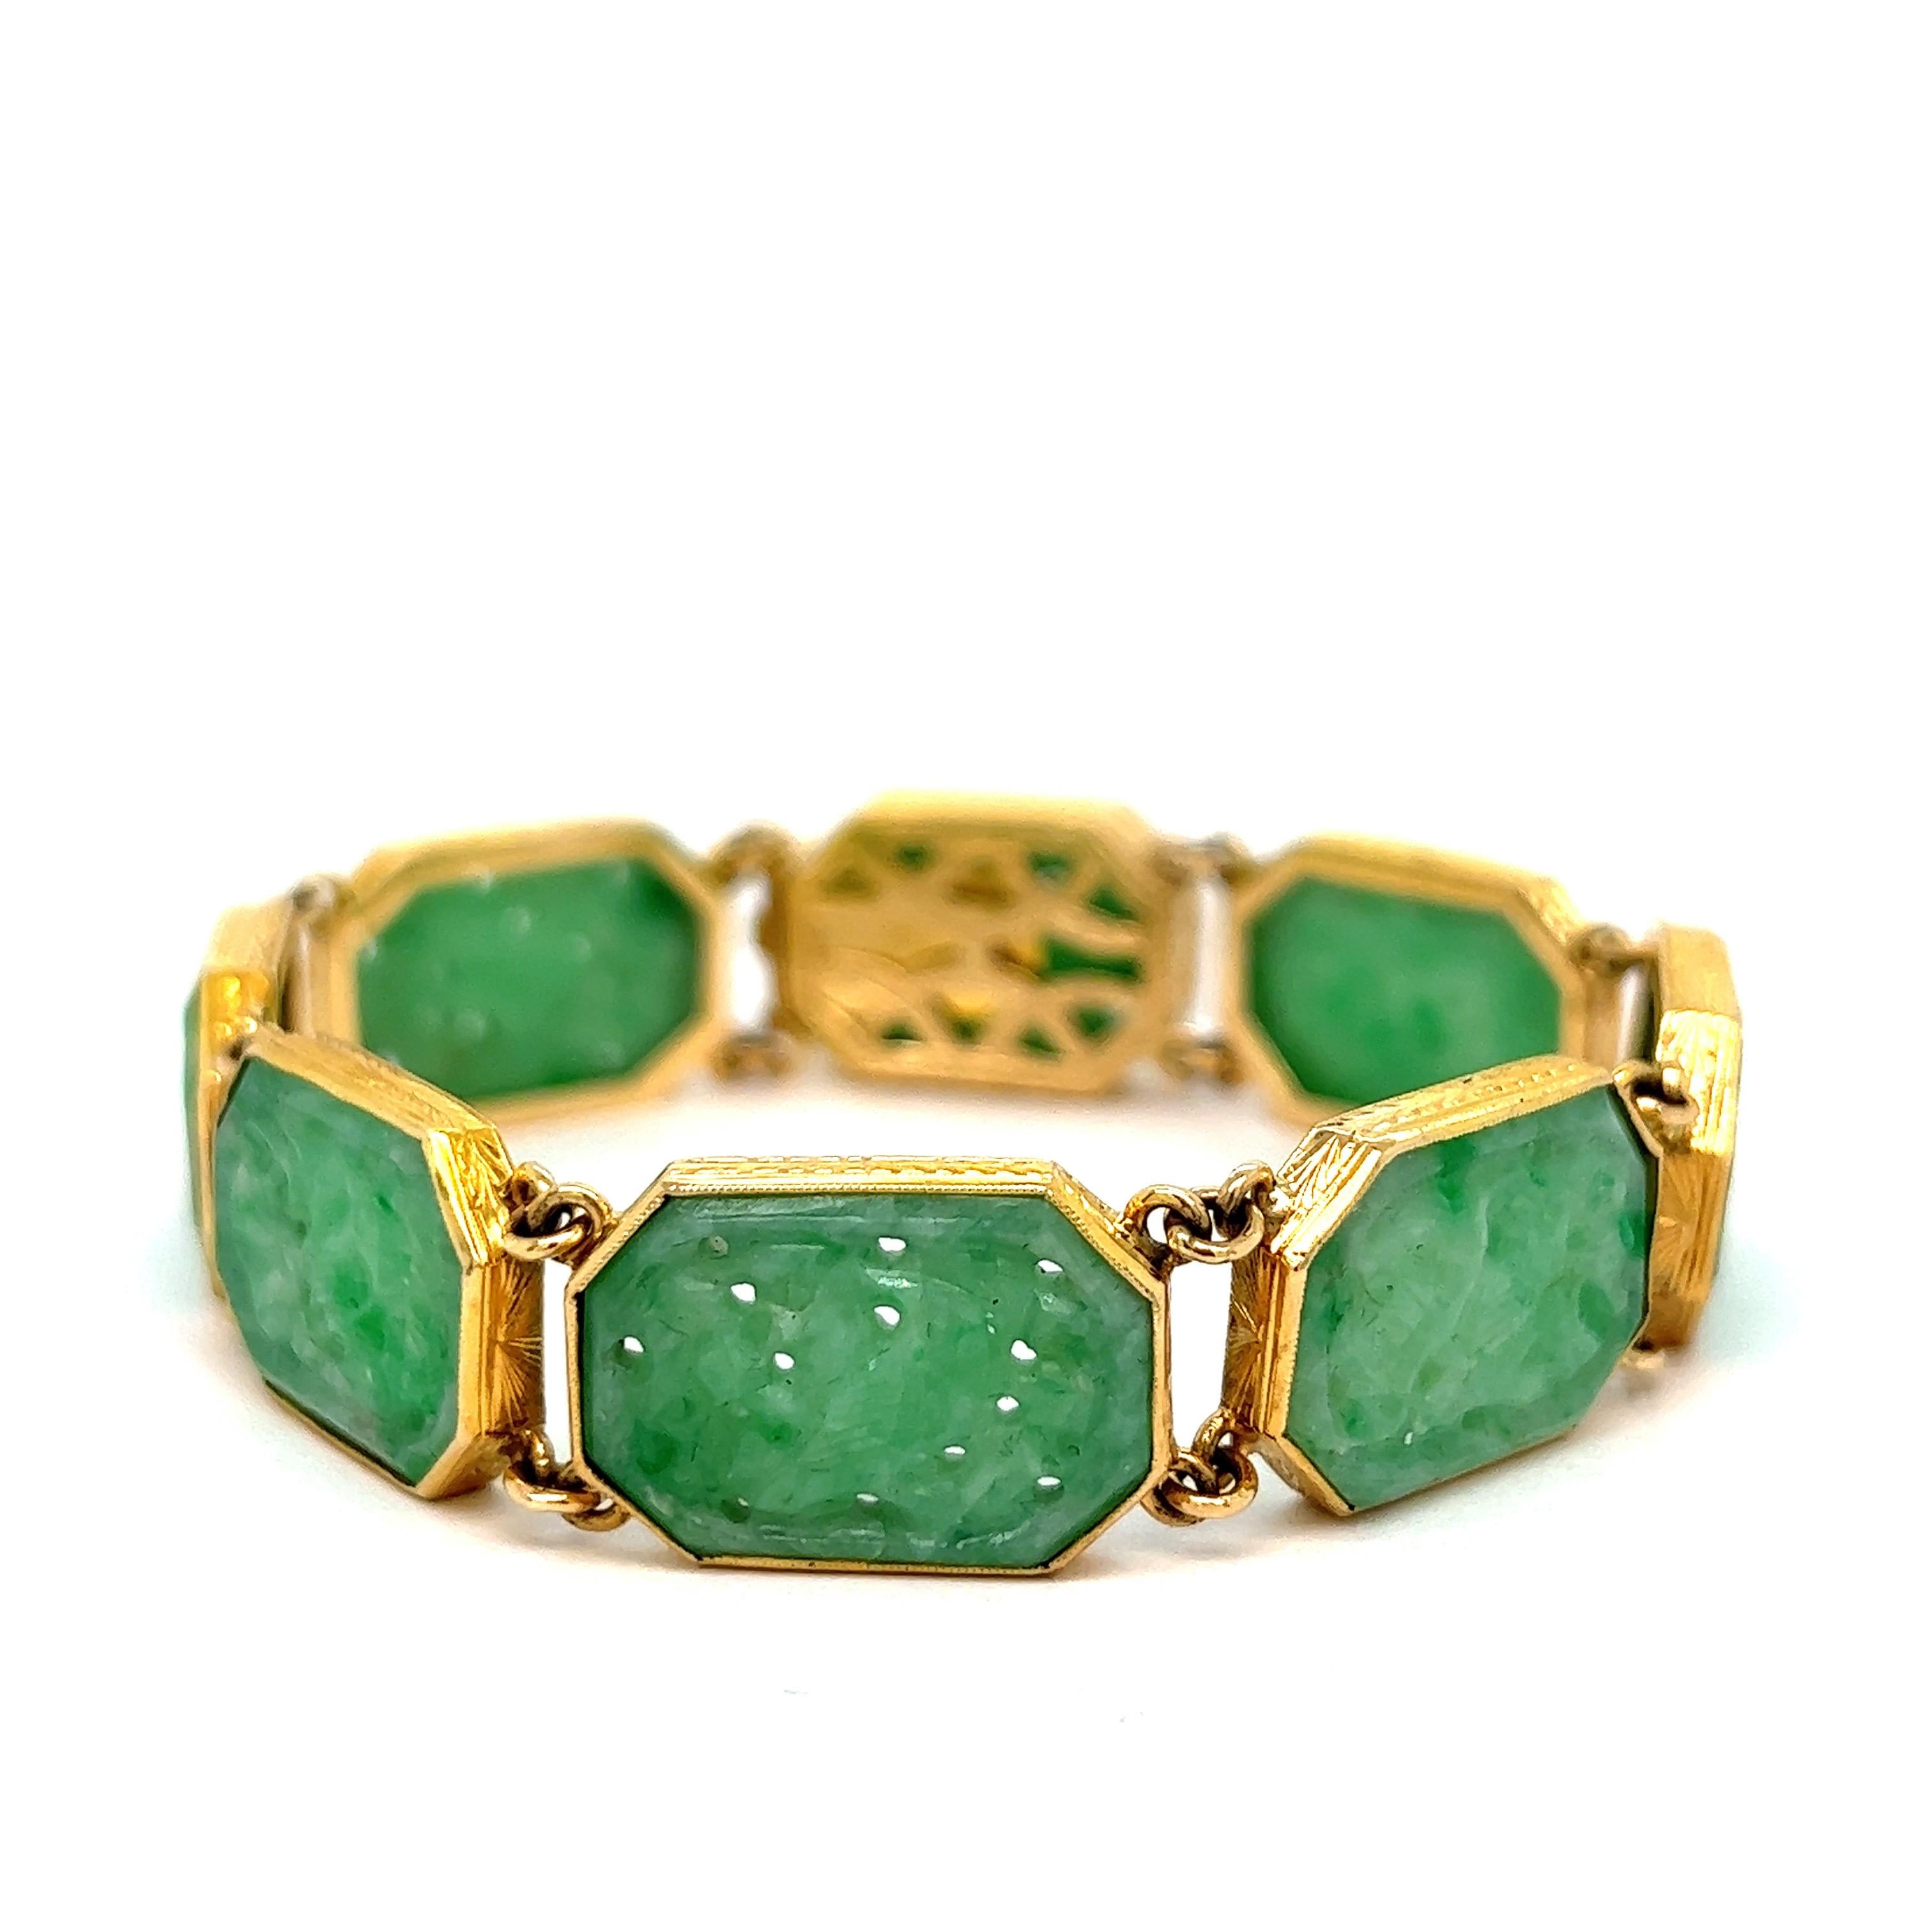 Jadeite gold link bracelet

Elongated octagonal links of hand carved jadeite center stones, featuring an openwork bird motif; wheat style accents adorn the bezels of each link; marked 14k

Size: width 0.5 inch, length 7.25 inches
Total weight: 27.8